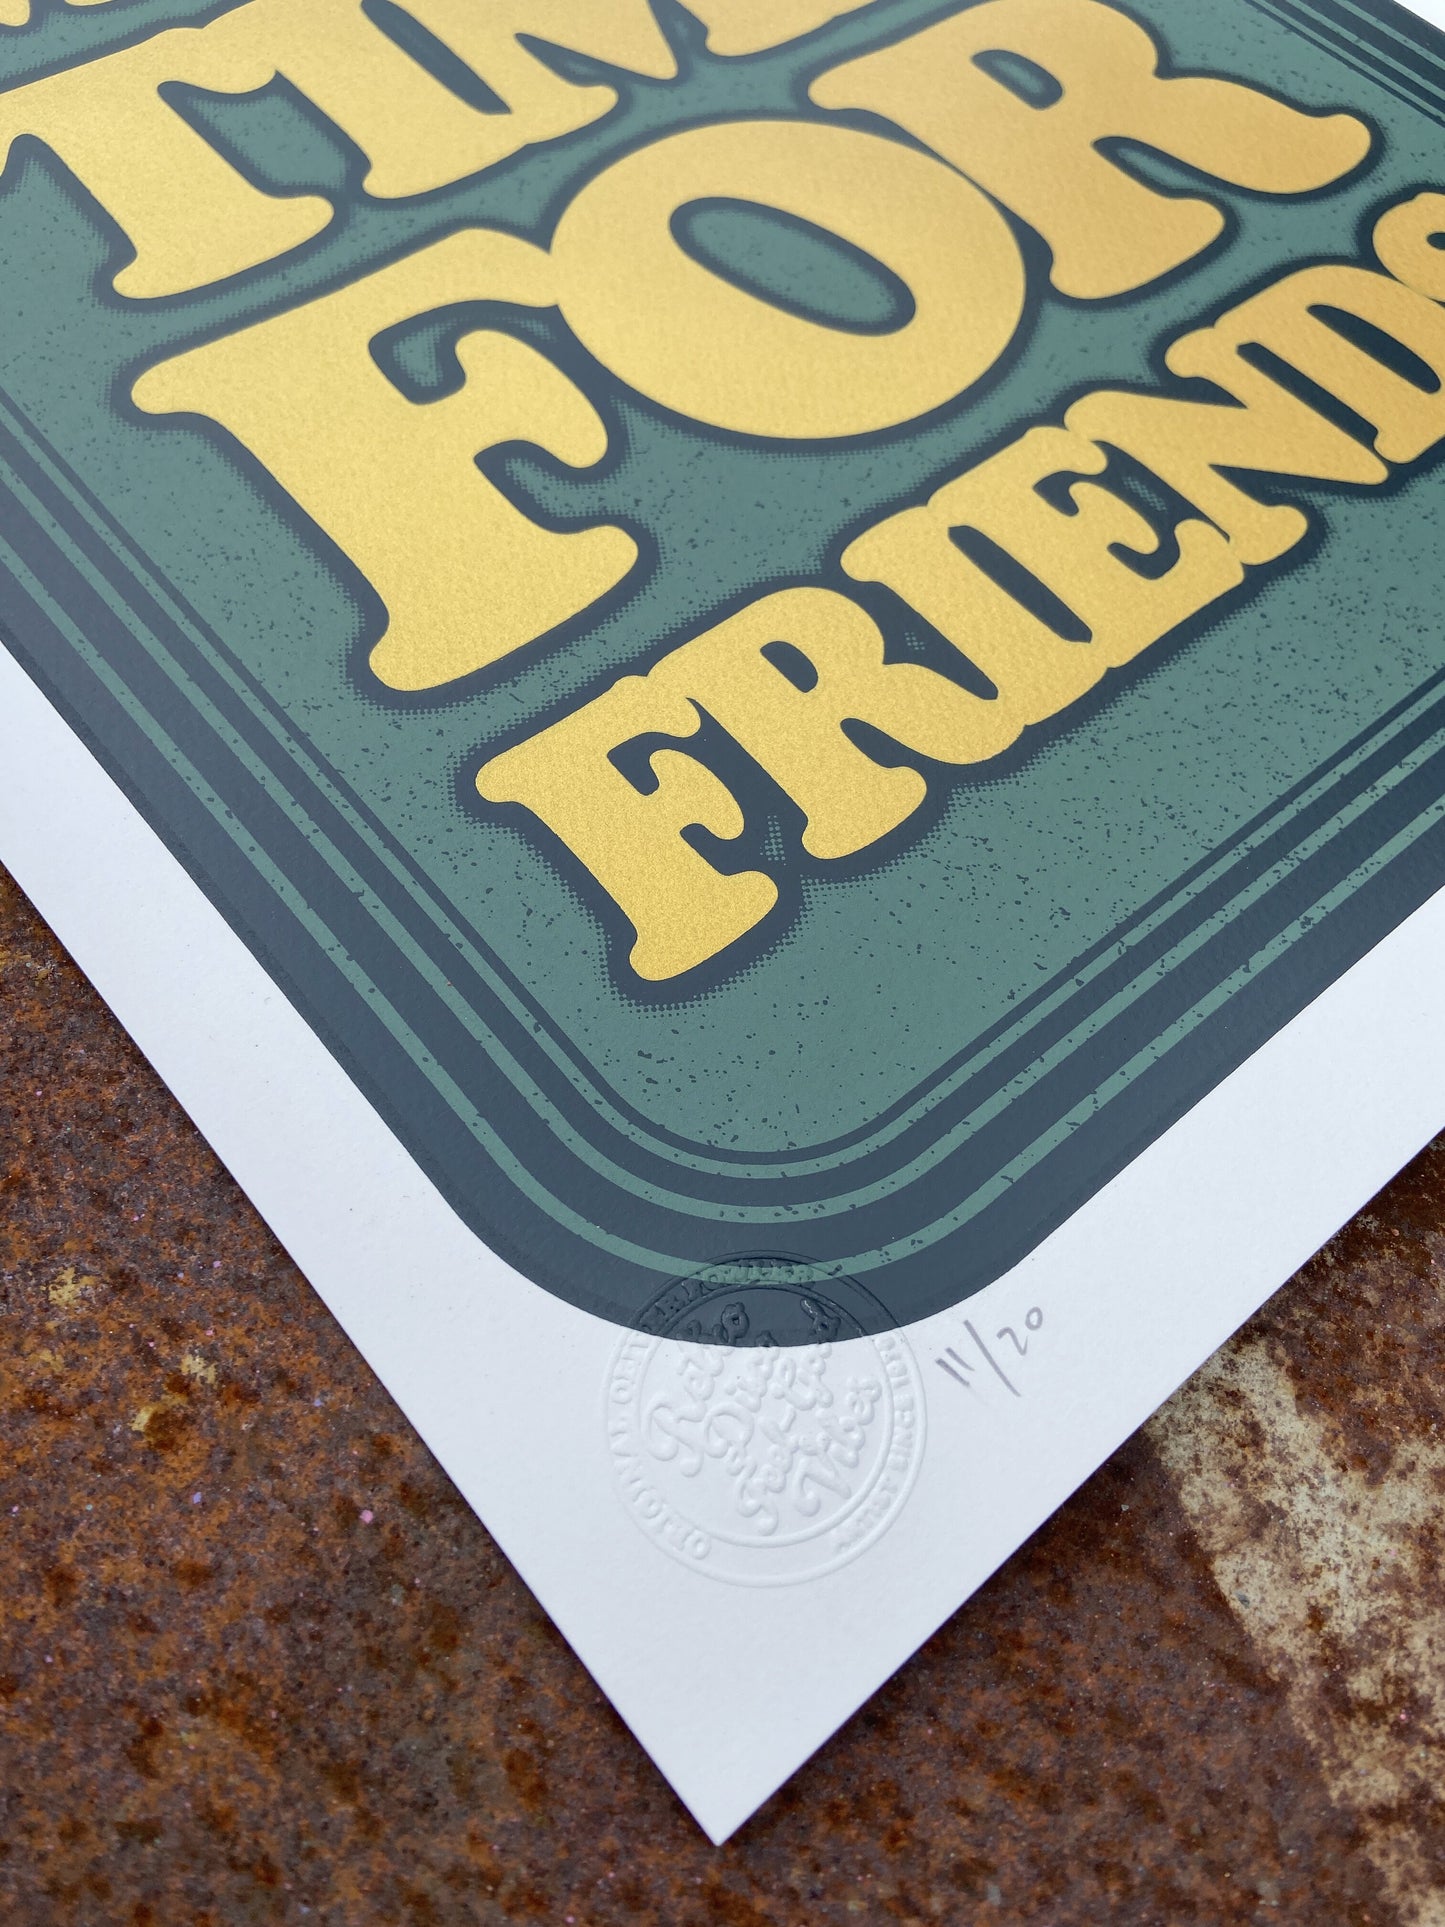 Make More Time For Friends (Gold Ink version)